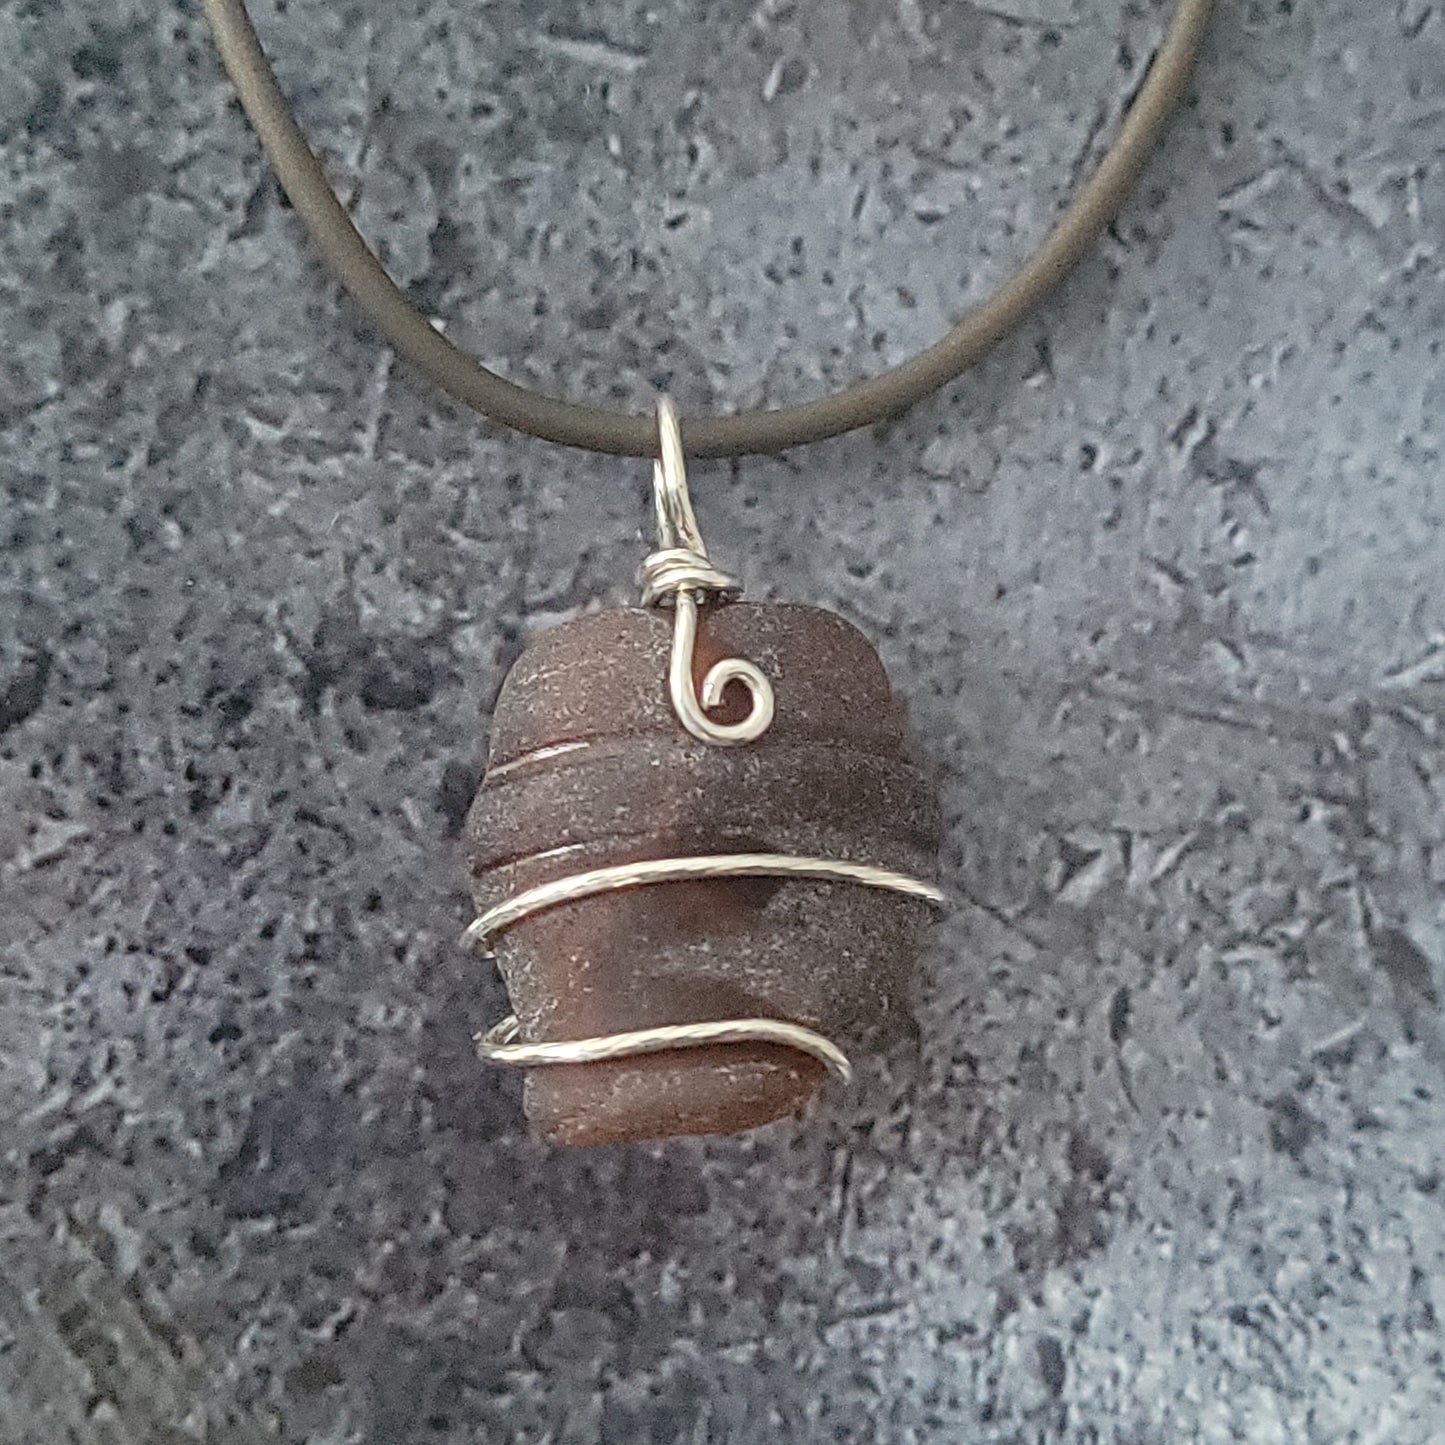 Brown Sea Glass Necklace